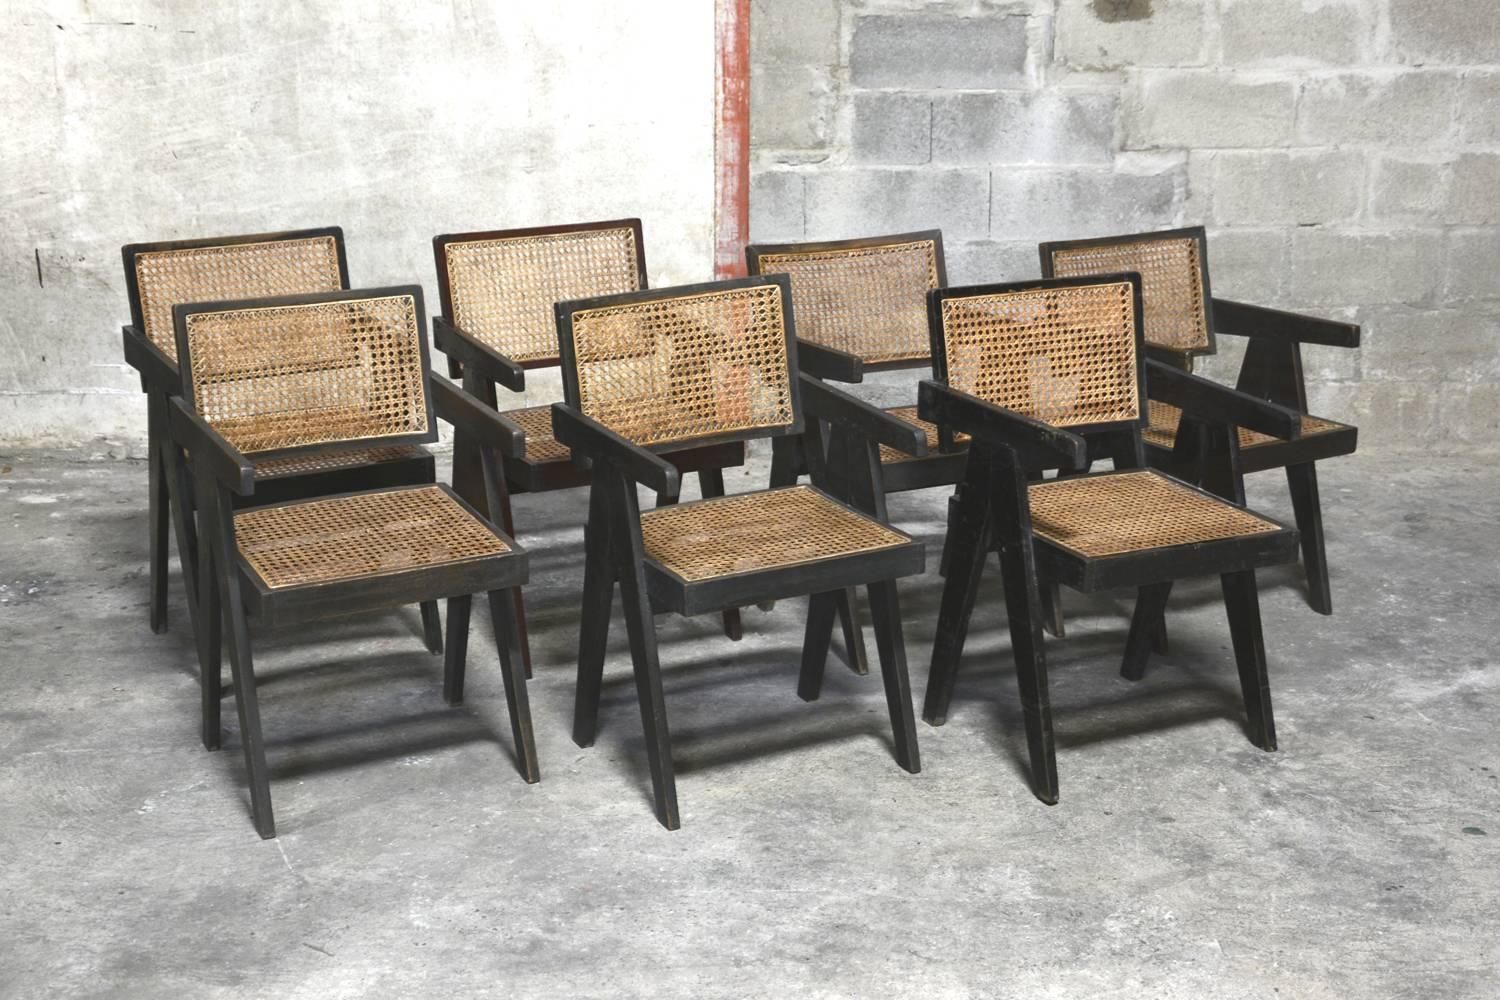 Pierre Jeanneret, very rare set of five cane and teakwood Office Armchairs from administrative buildings in Chandigarh, India. Version with back separated from the seat. Teak, woven cane and upholstered seat cushion featuring cloth covering.

These